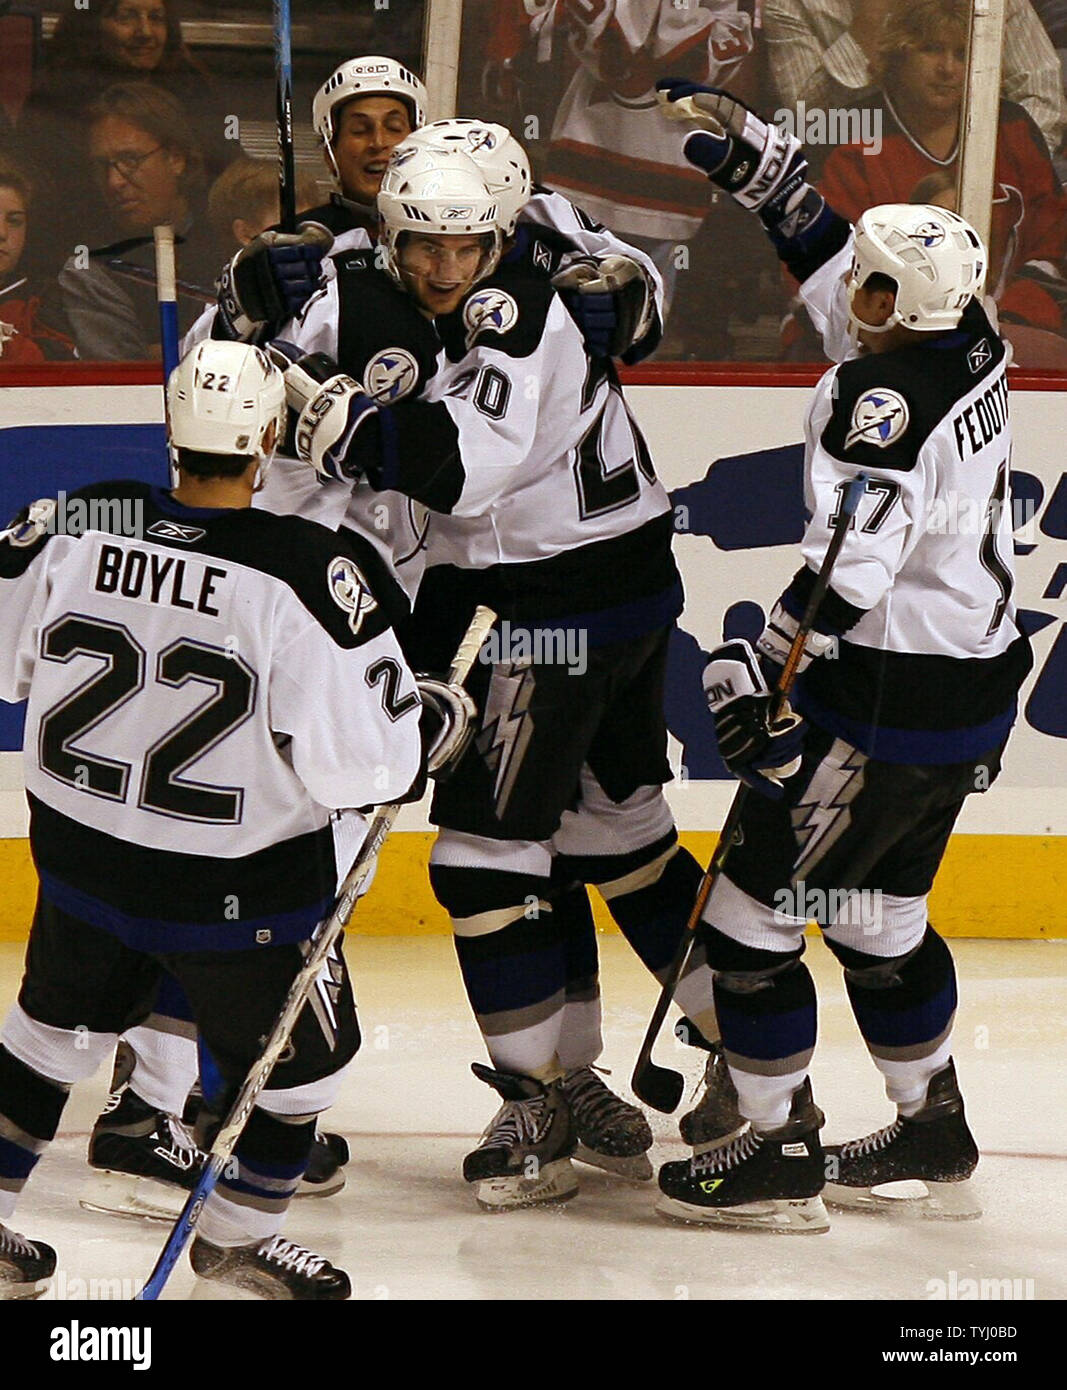 Tampa Bay Lightning Dan Boyle (22), Vaclav Prospal (20), and Ruslan Fedotenko (17) join in the celebration after Vincent Lecavalier scored a goal in the third period at the Continental Airlines Arena in East Rutherford, New Jersey on April 14, 2007.  The Tampa Bay Lightning defeated the New Jersey Devils 3-2.    (UPI Photo/John Angelillo) Stock Photo